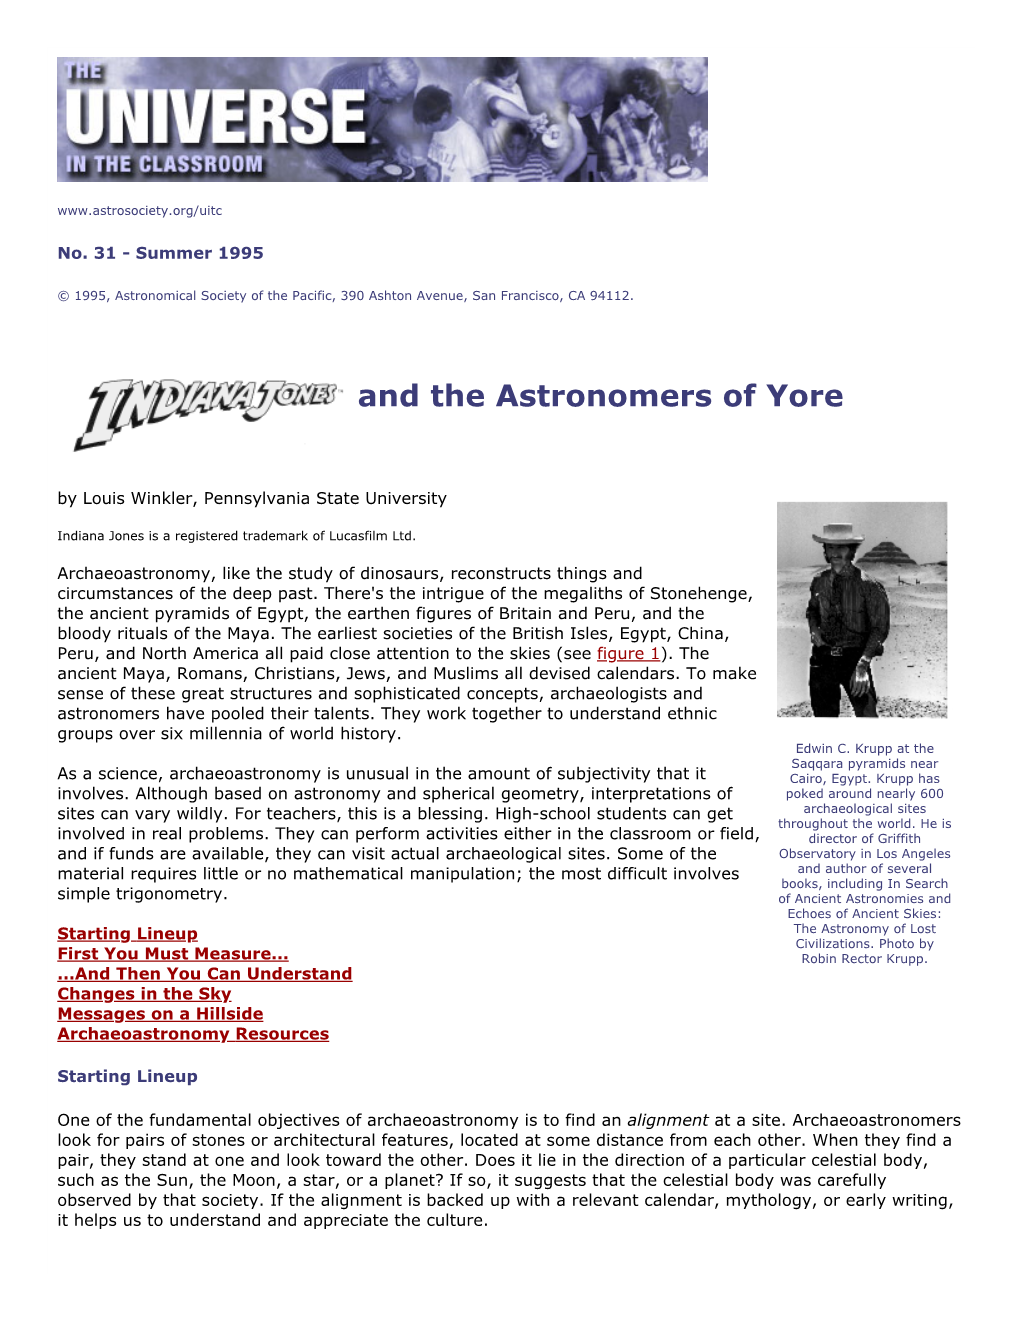 31. Indiana Jones and the Astronomers of Yore